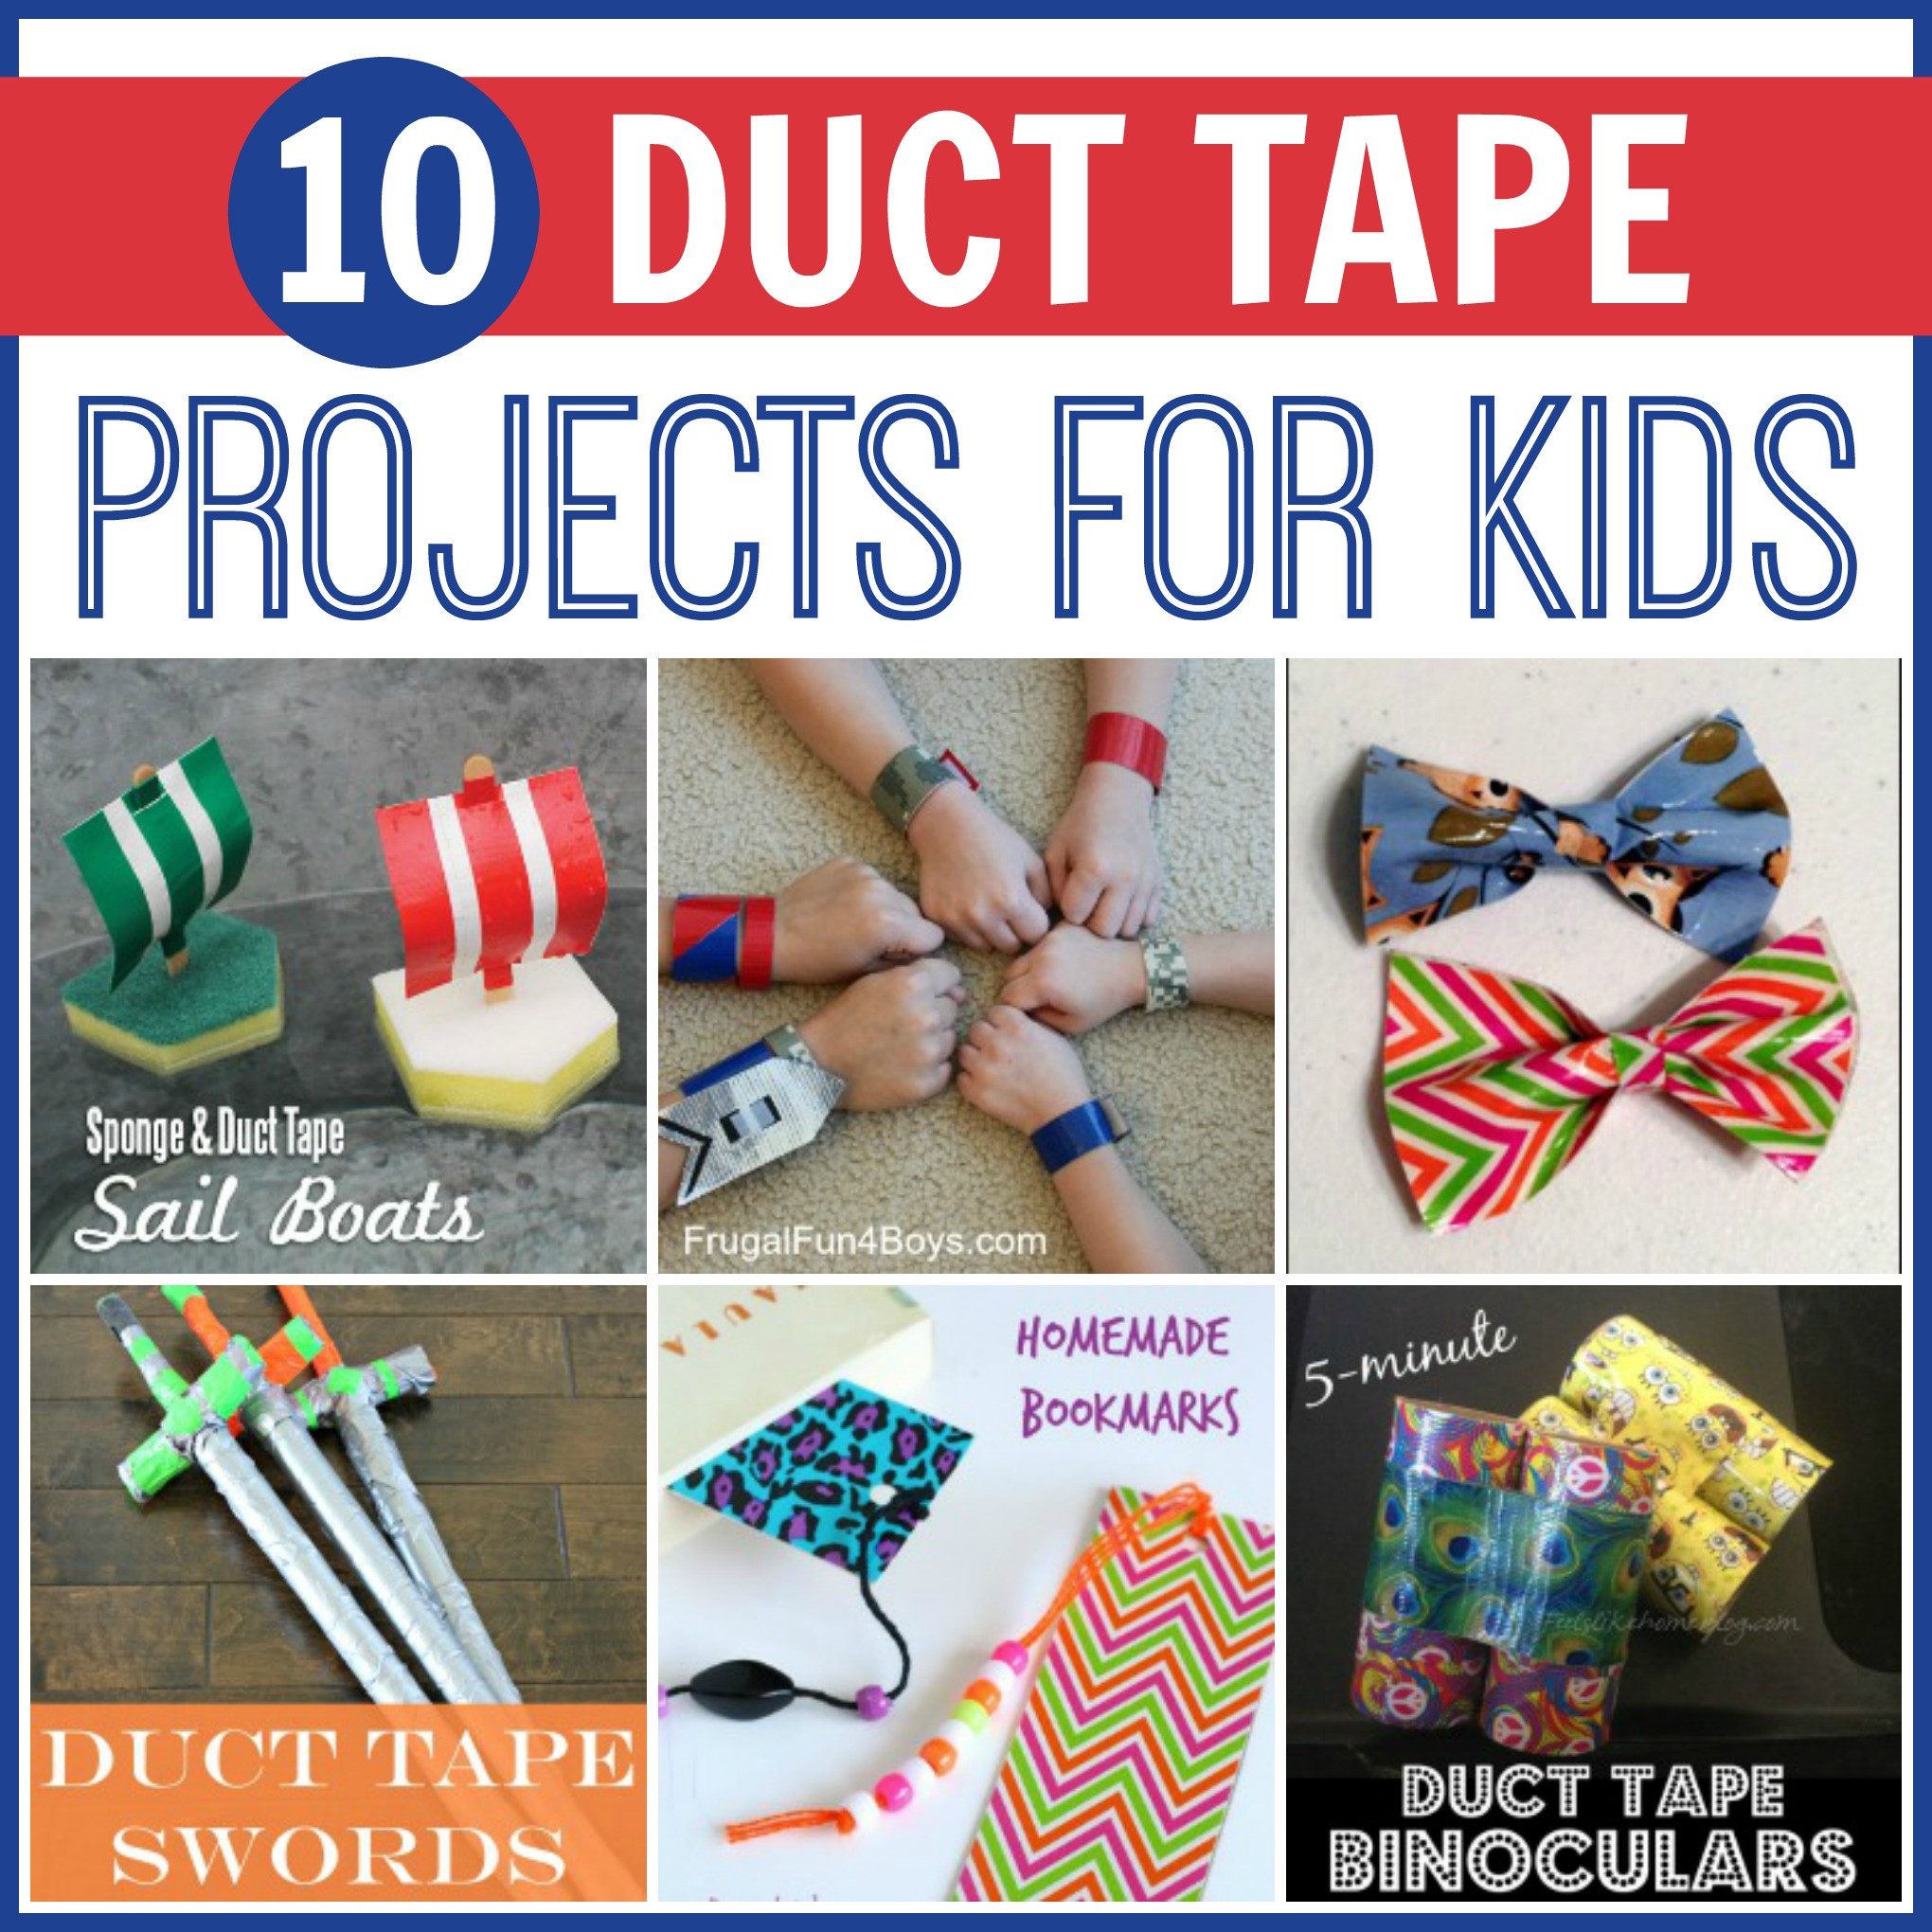 Duct Tape Projects For Kids
 10 Duct Tape Projects for Kids My Joy Filled Life